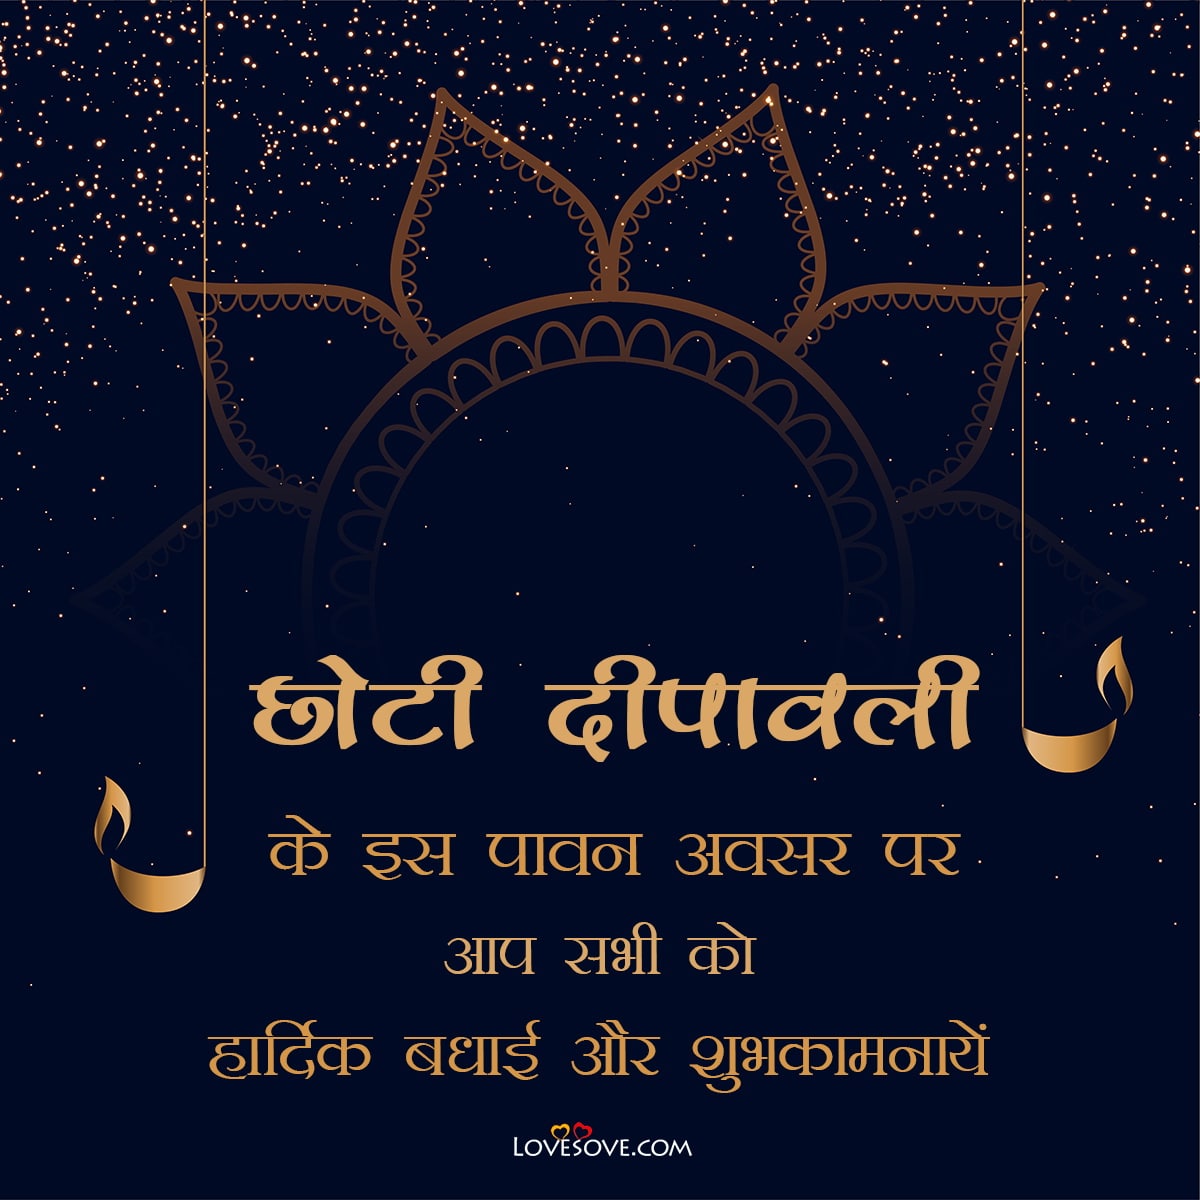 21382 1, indian festivals wishes